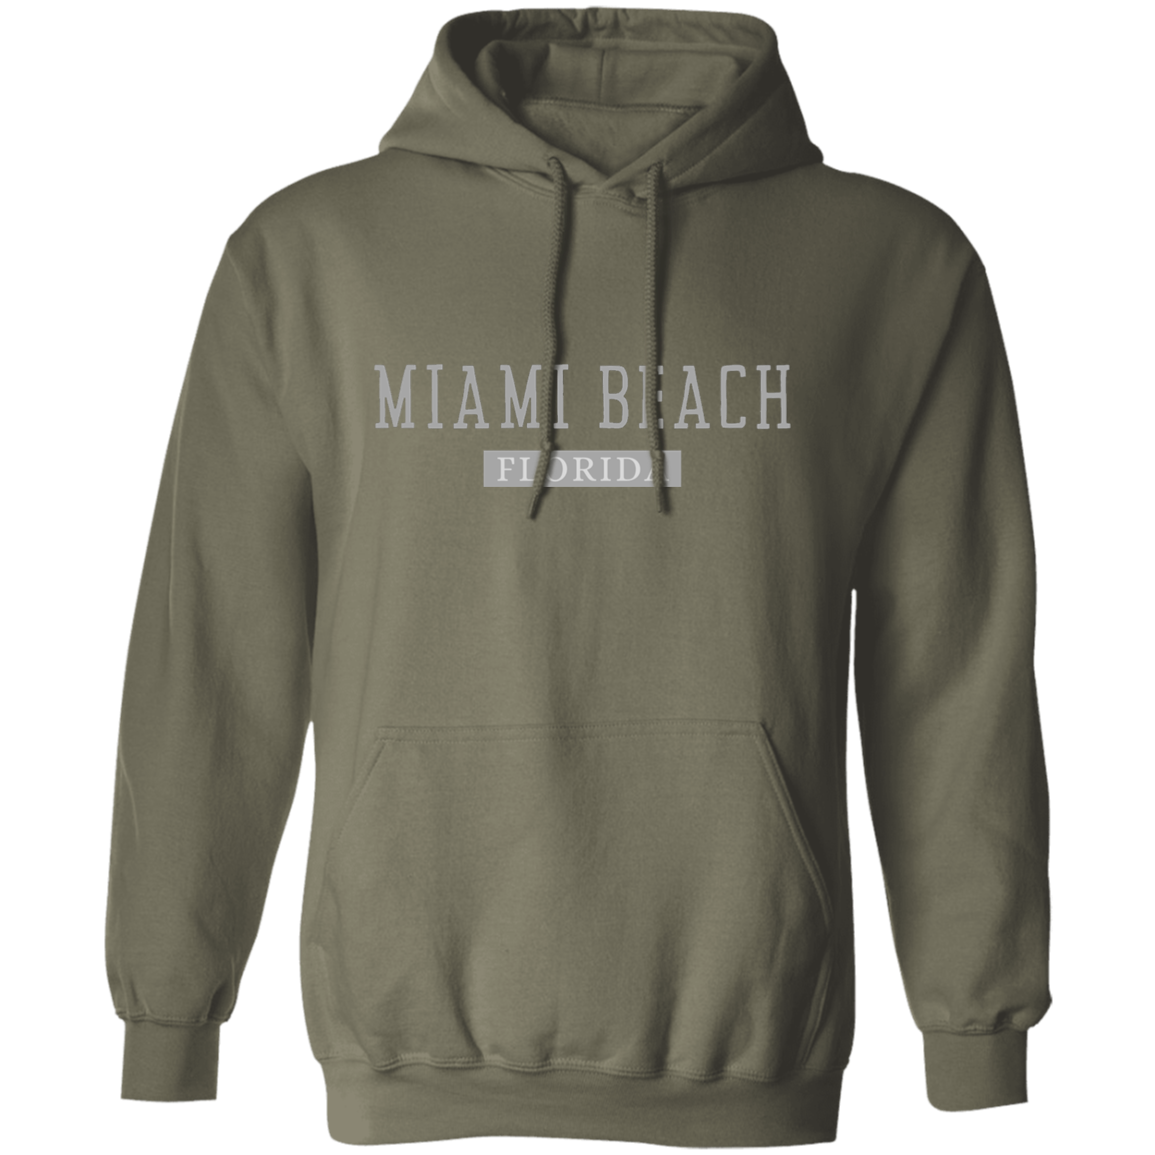 Miami Beach Florida College  Pullover Hoodie, Birthday Gift For Her / Him